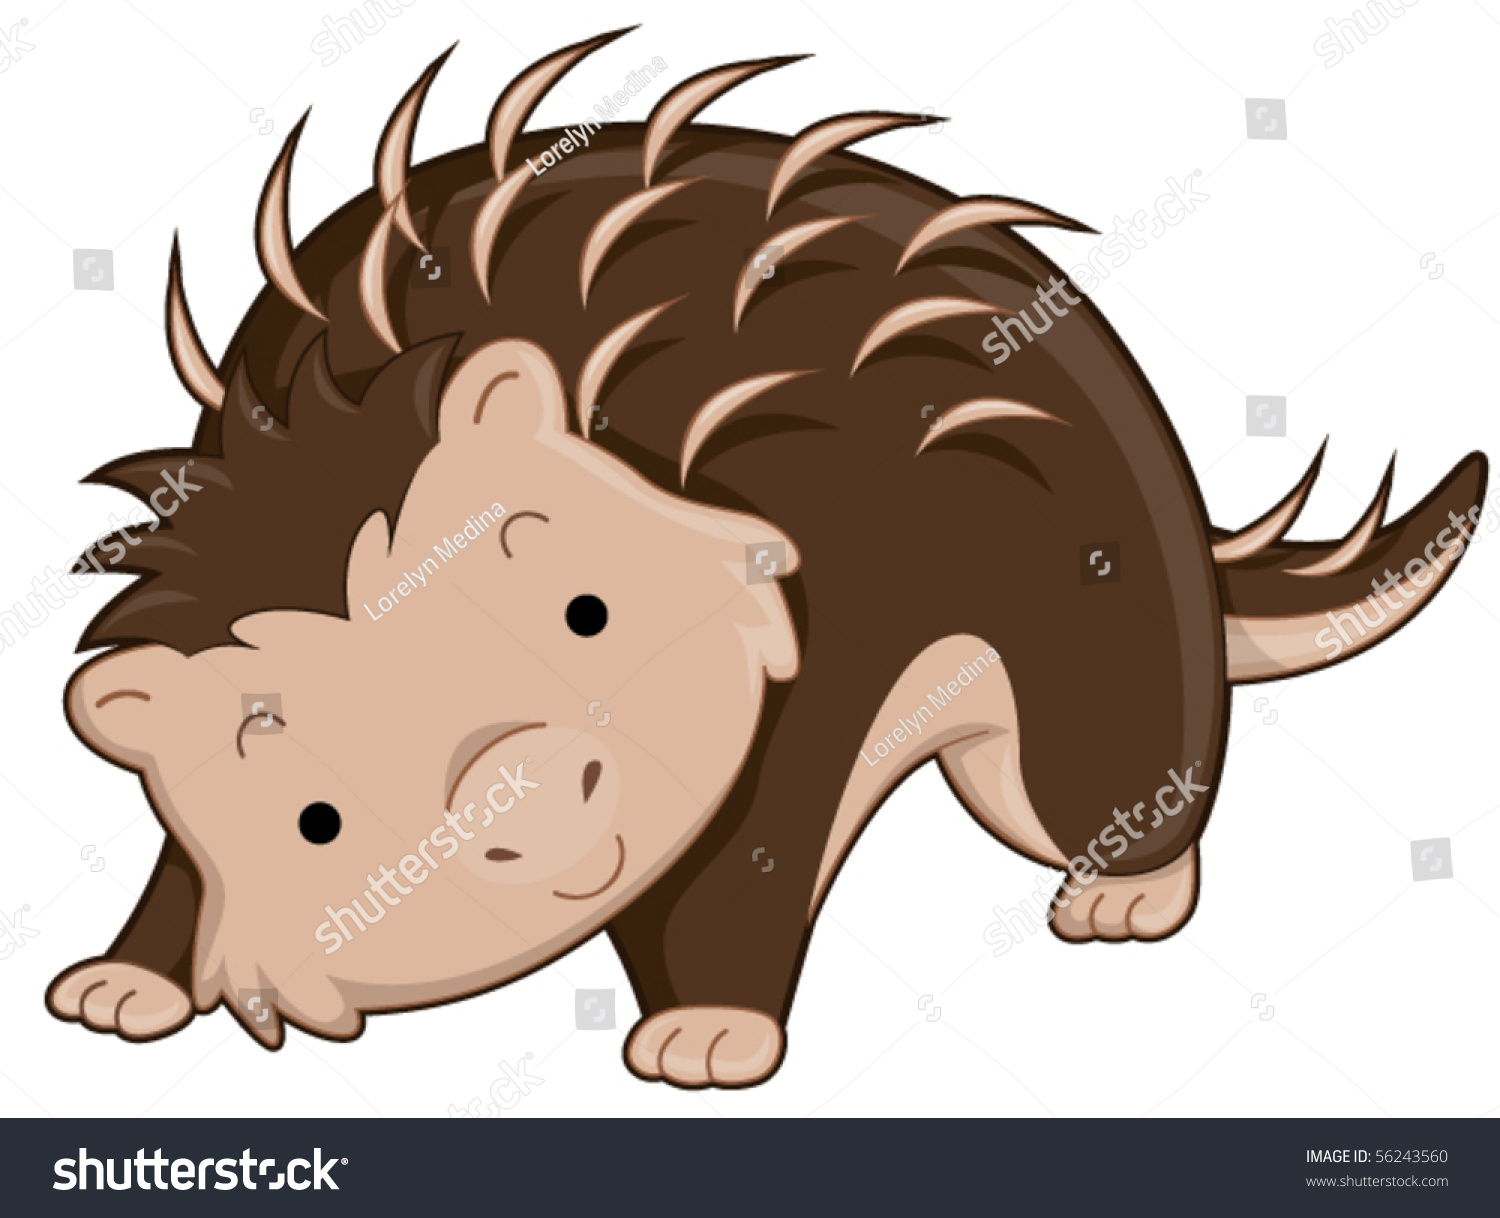 Cute Porcupine Vector Stock Vector Royalty Free 56243560 Shutterstock 